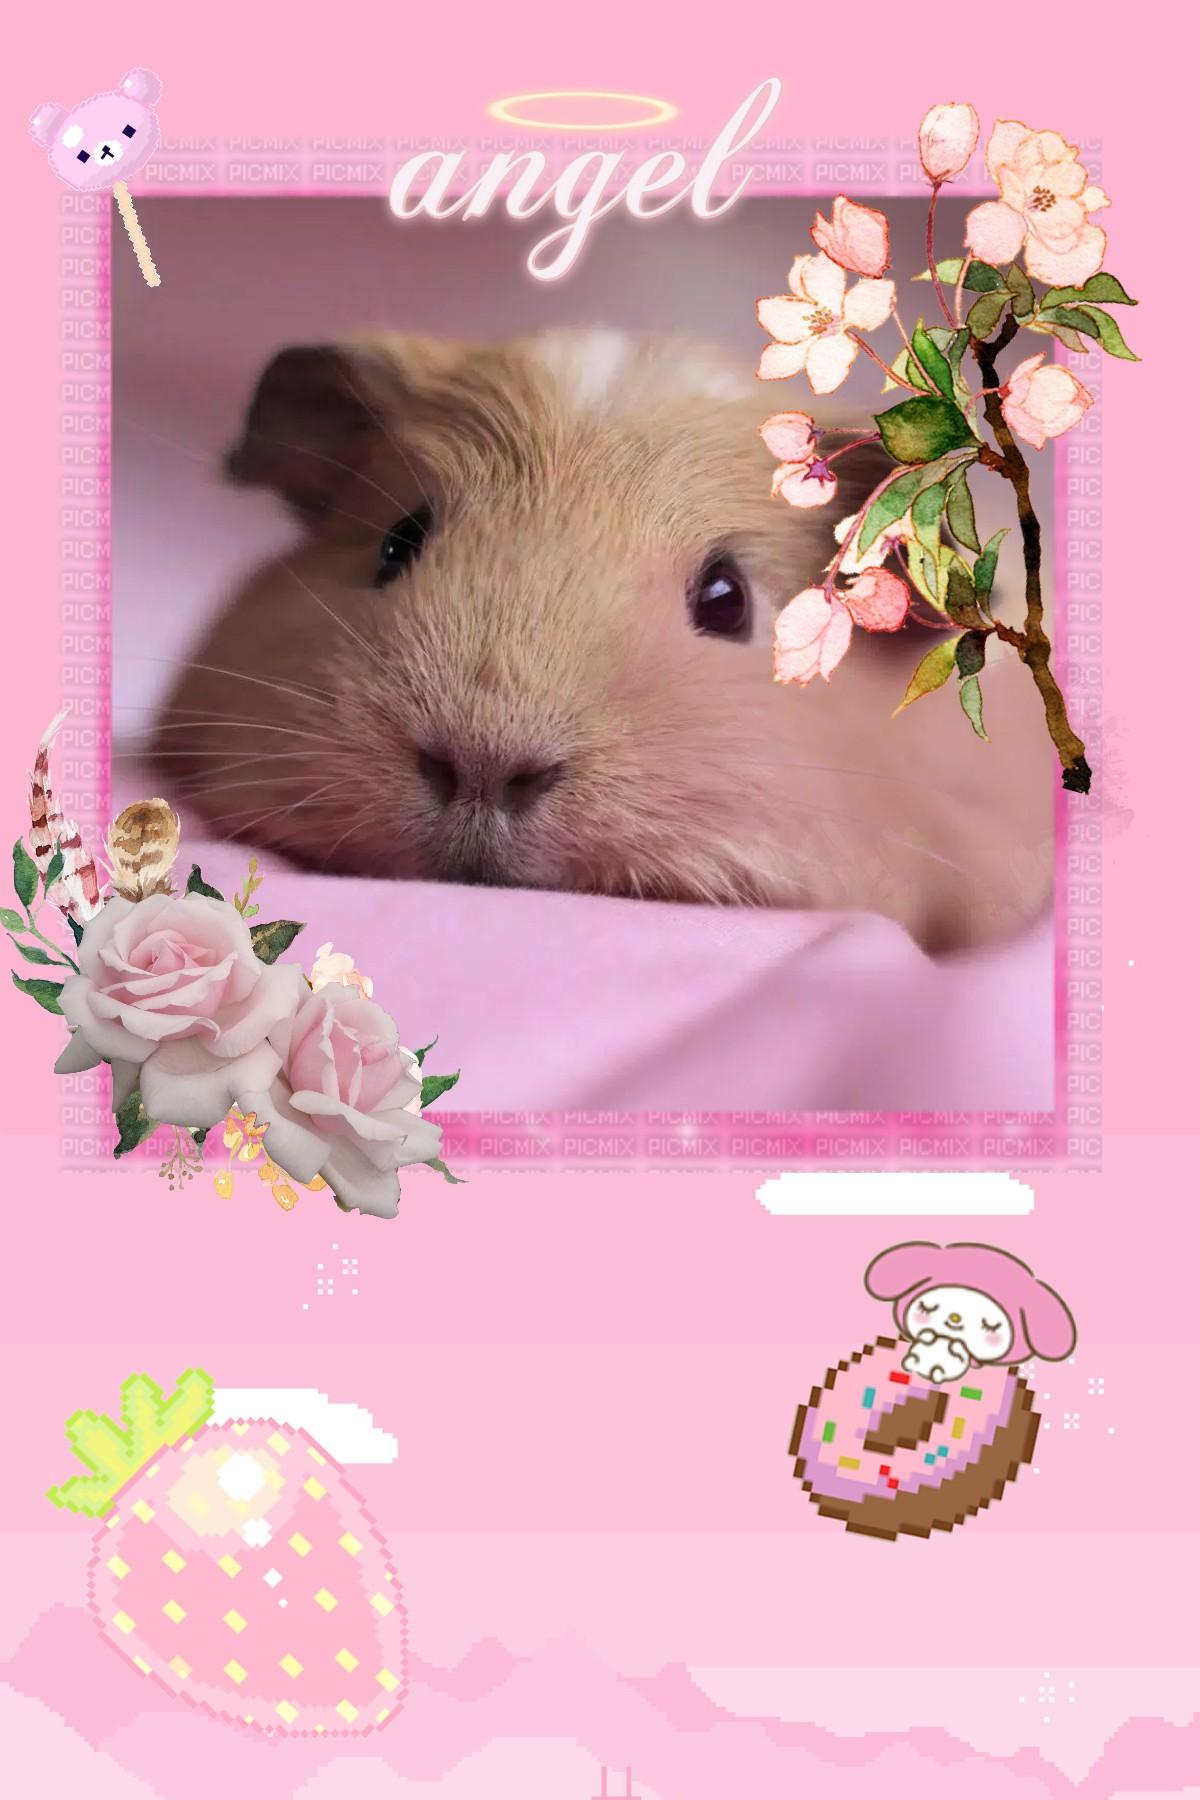 Cute guinea ping

Nice and pink